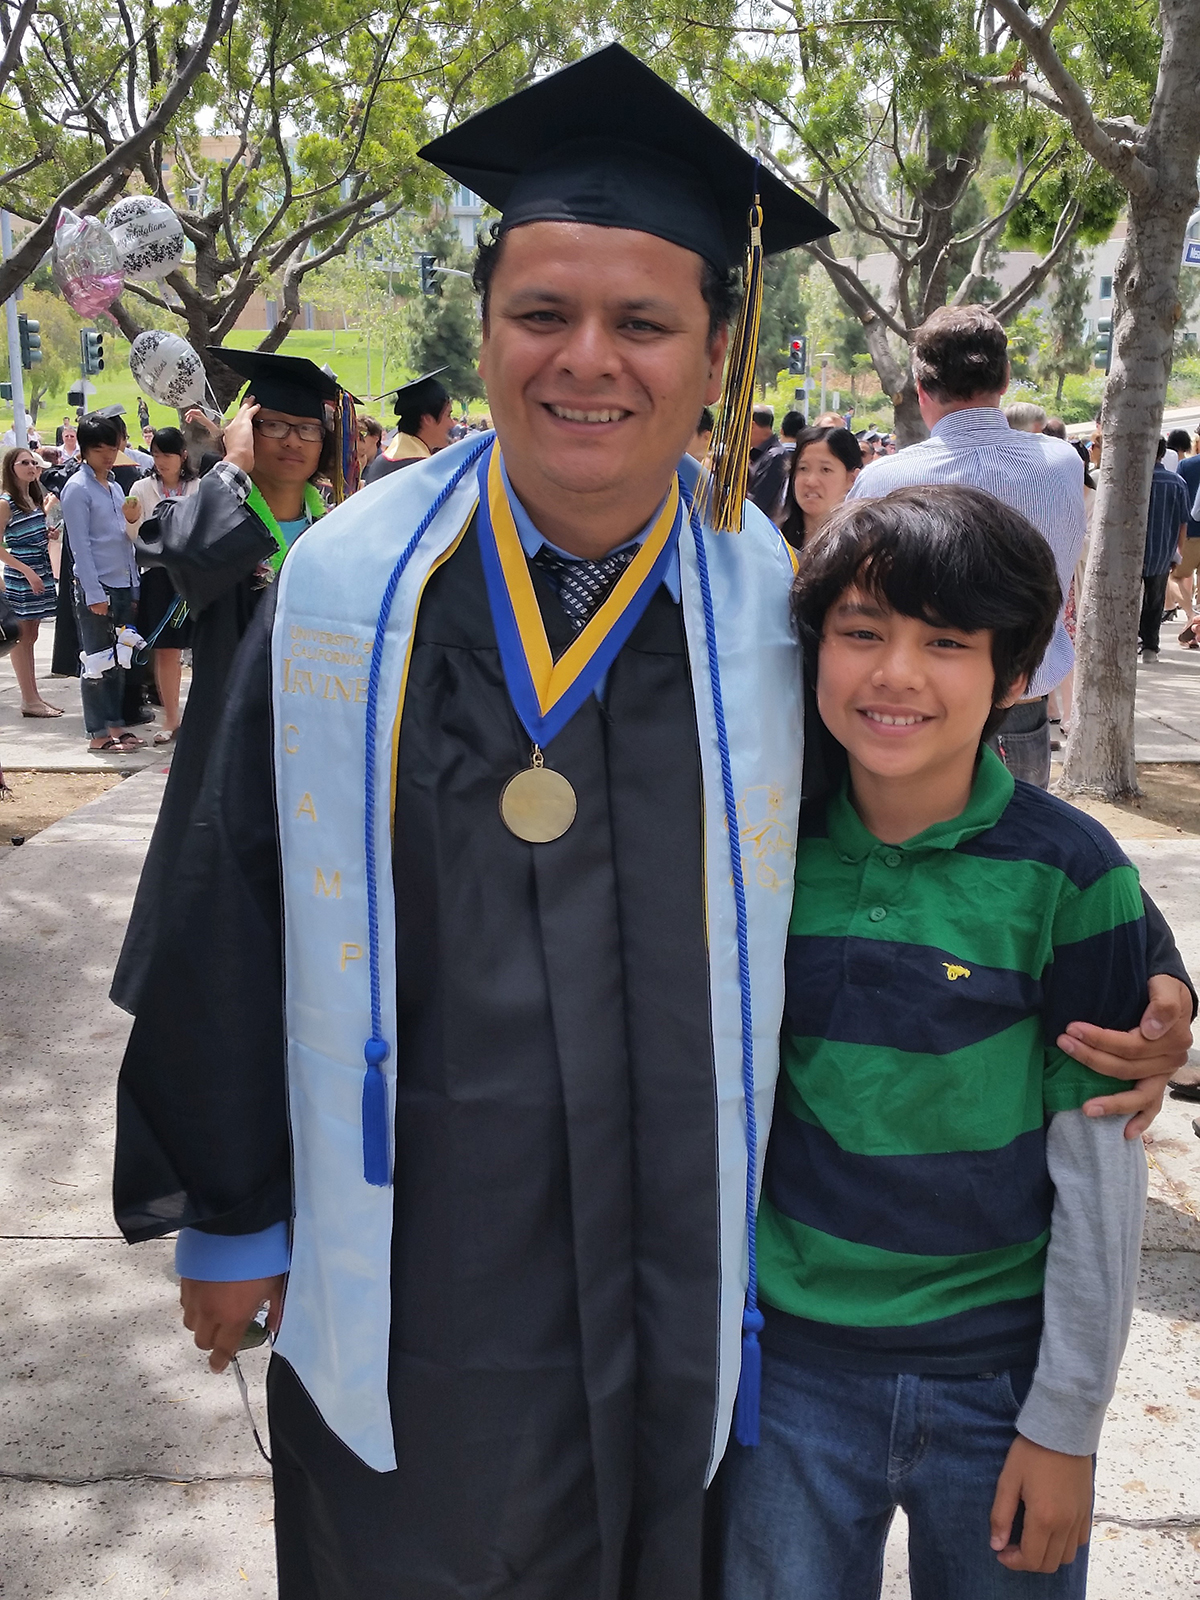 Edwin Solares with son at UC Irvine graduation